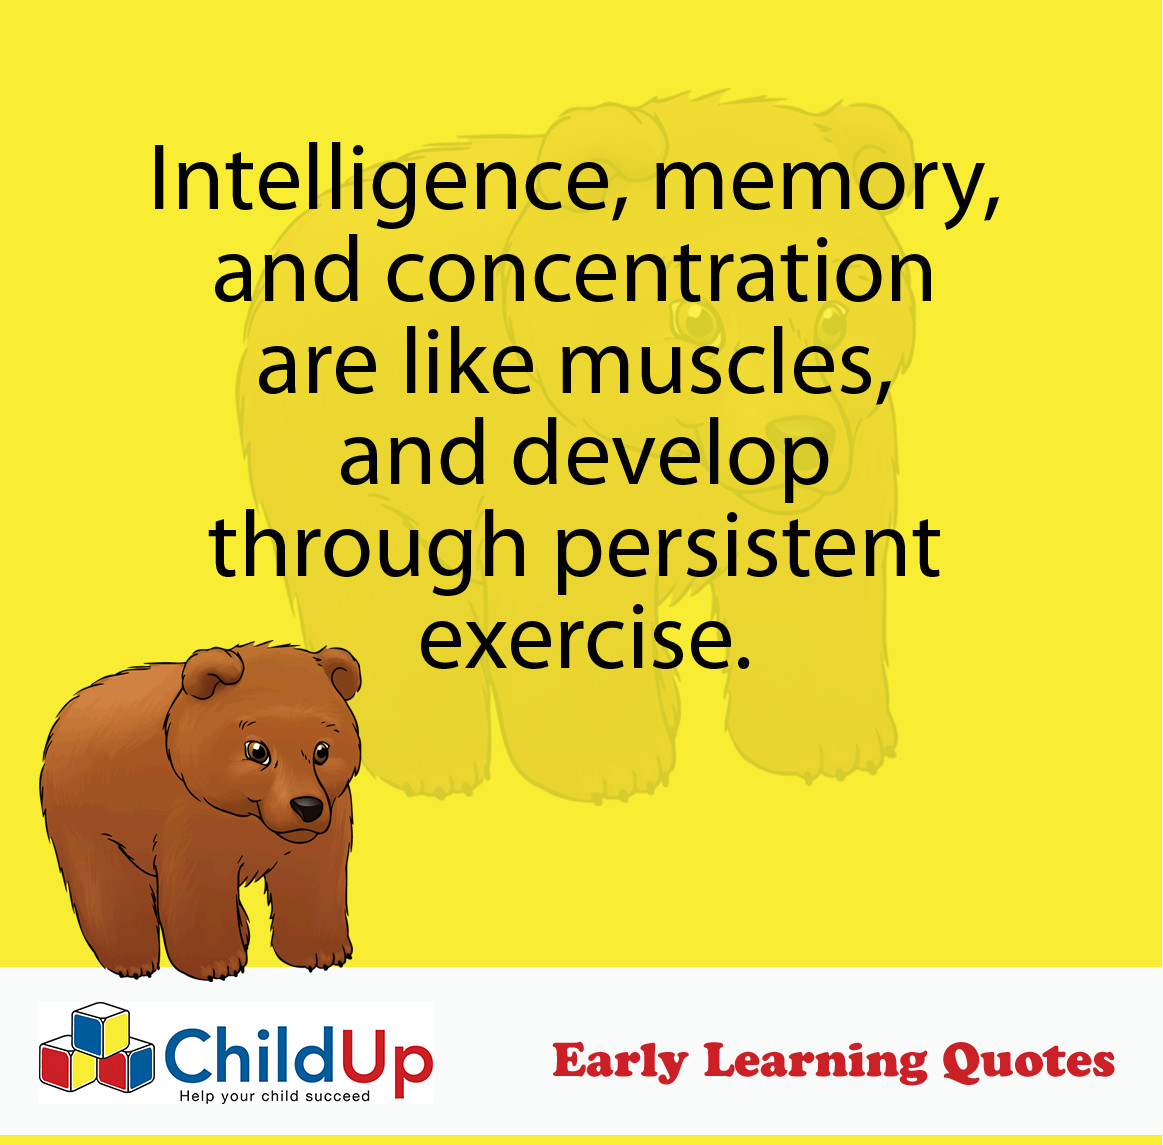 Early Childhood Education Quotes
 Famous Early Childhood Education Quotes QuotesGram